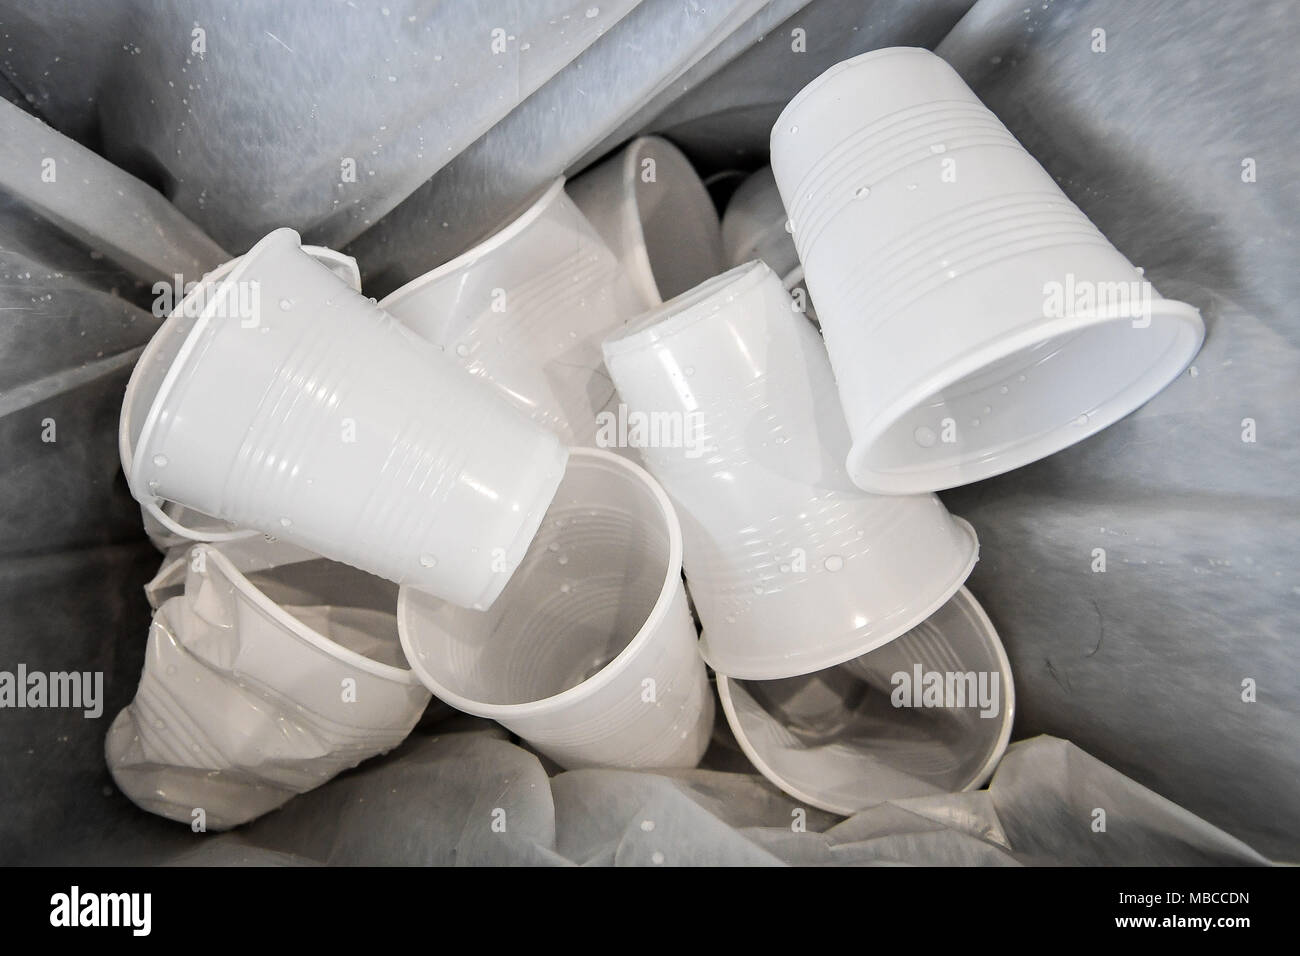 Used disposable drinking cups in a waste bin. While NHS trusts across the country opened up about the scale of disposable cup use, Government departments were less forthcoming. Stock Photo